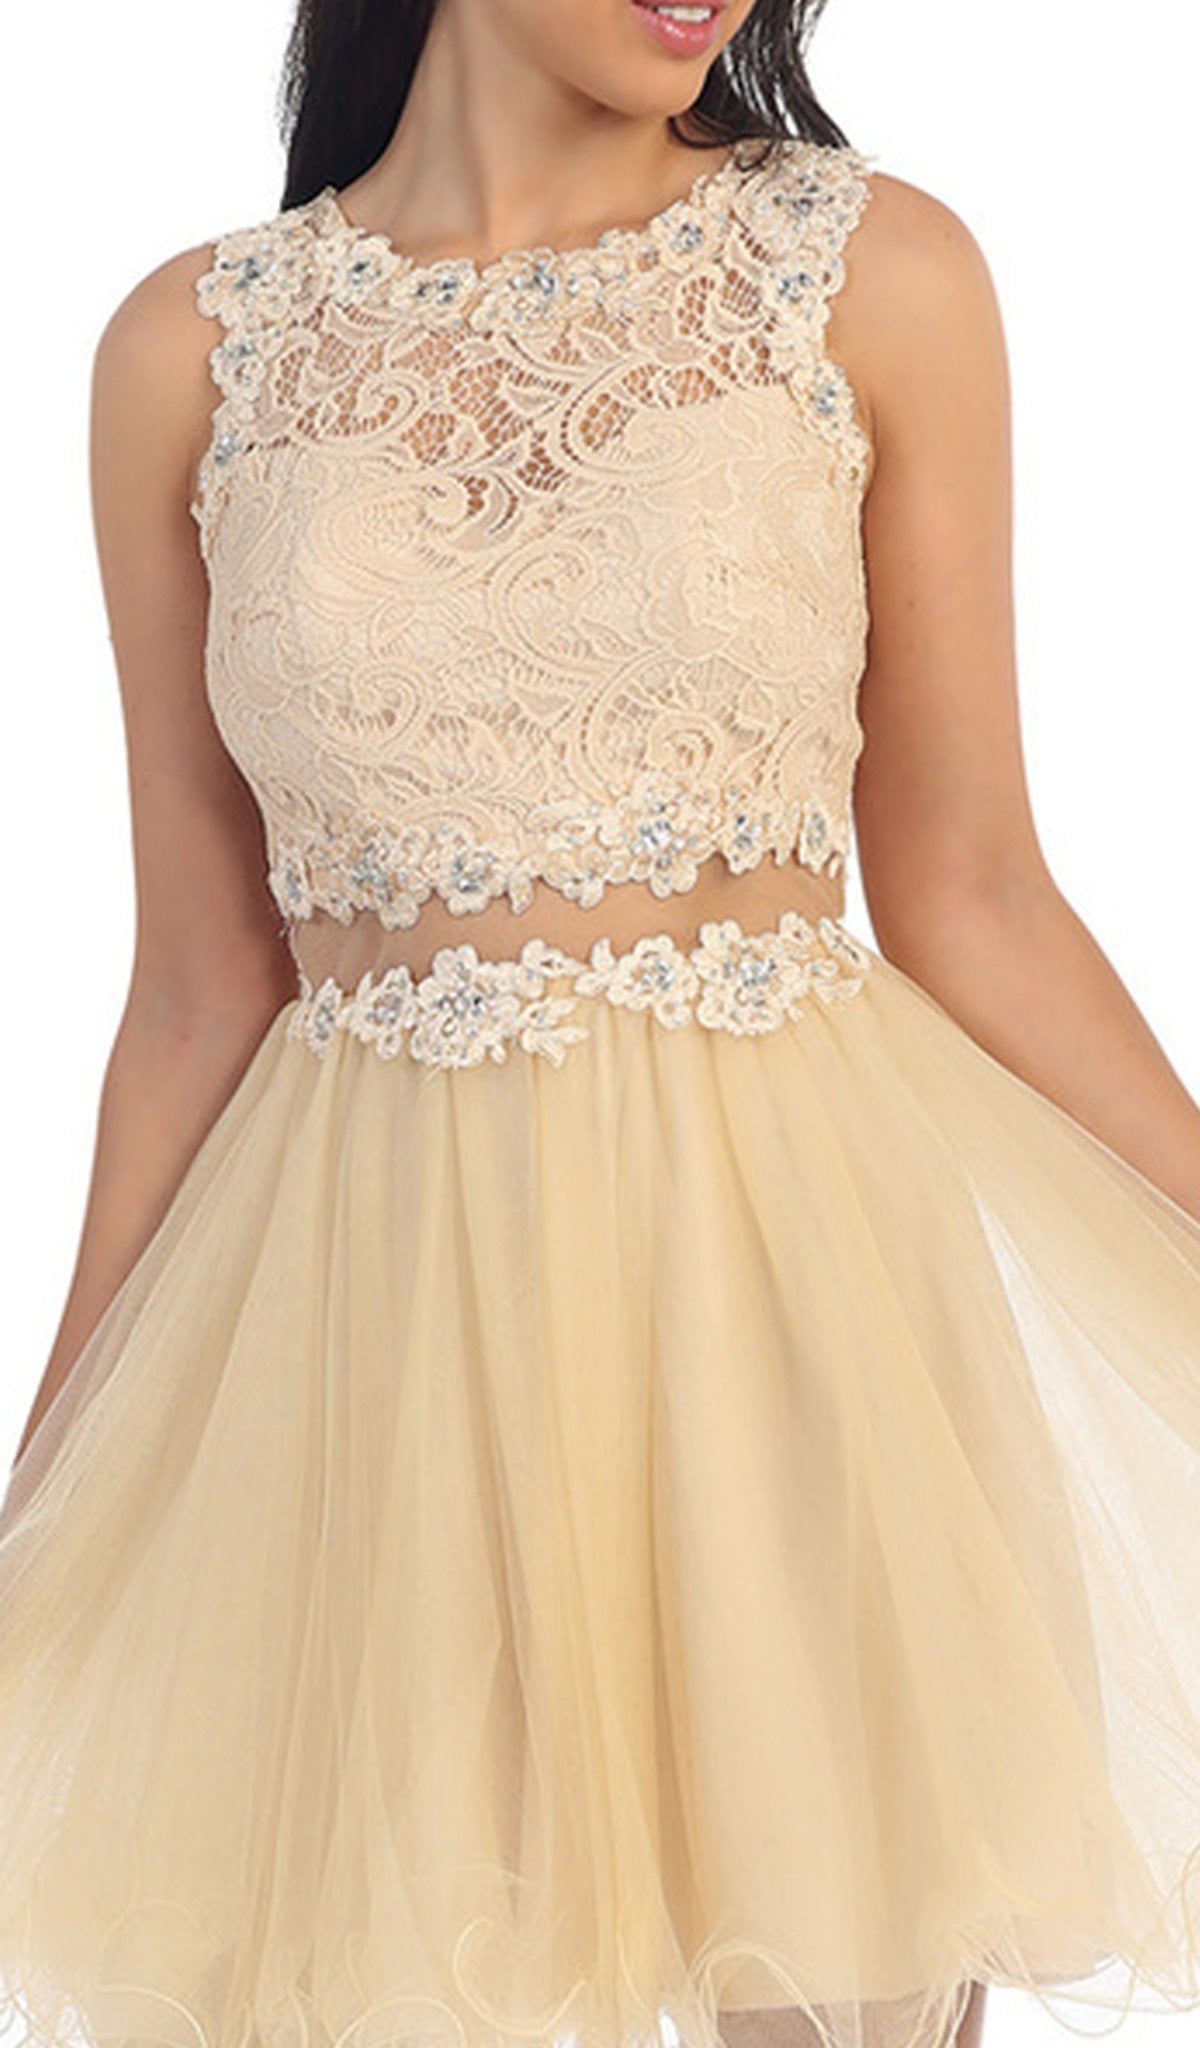 Dancing Queen - 9080 Bejeweled Lace Illusion Short Prom Dress Prom Dresses